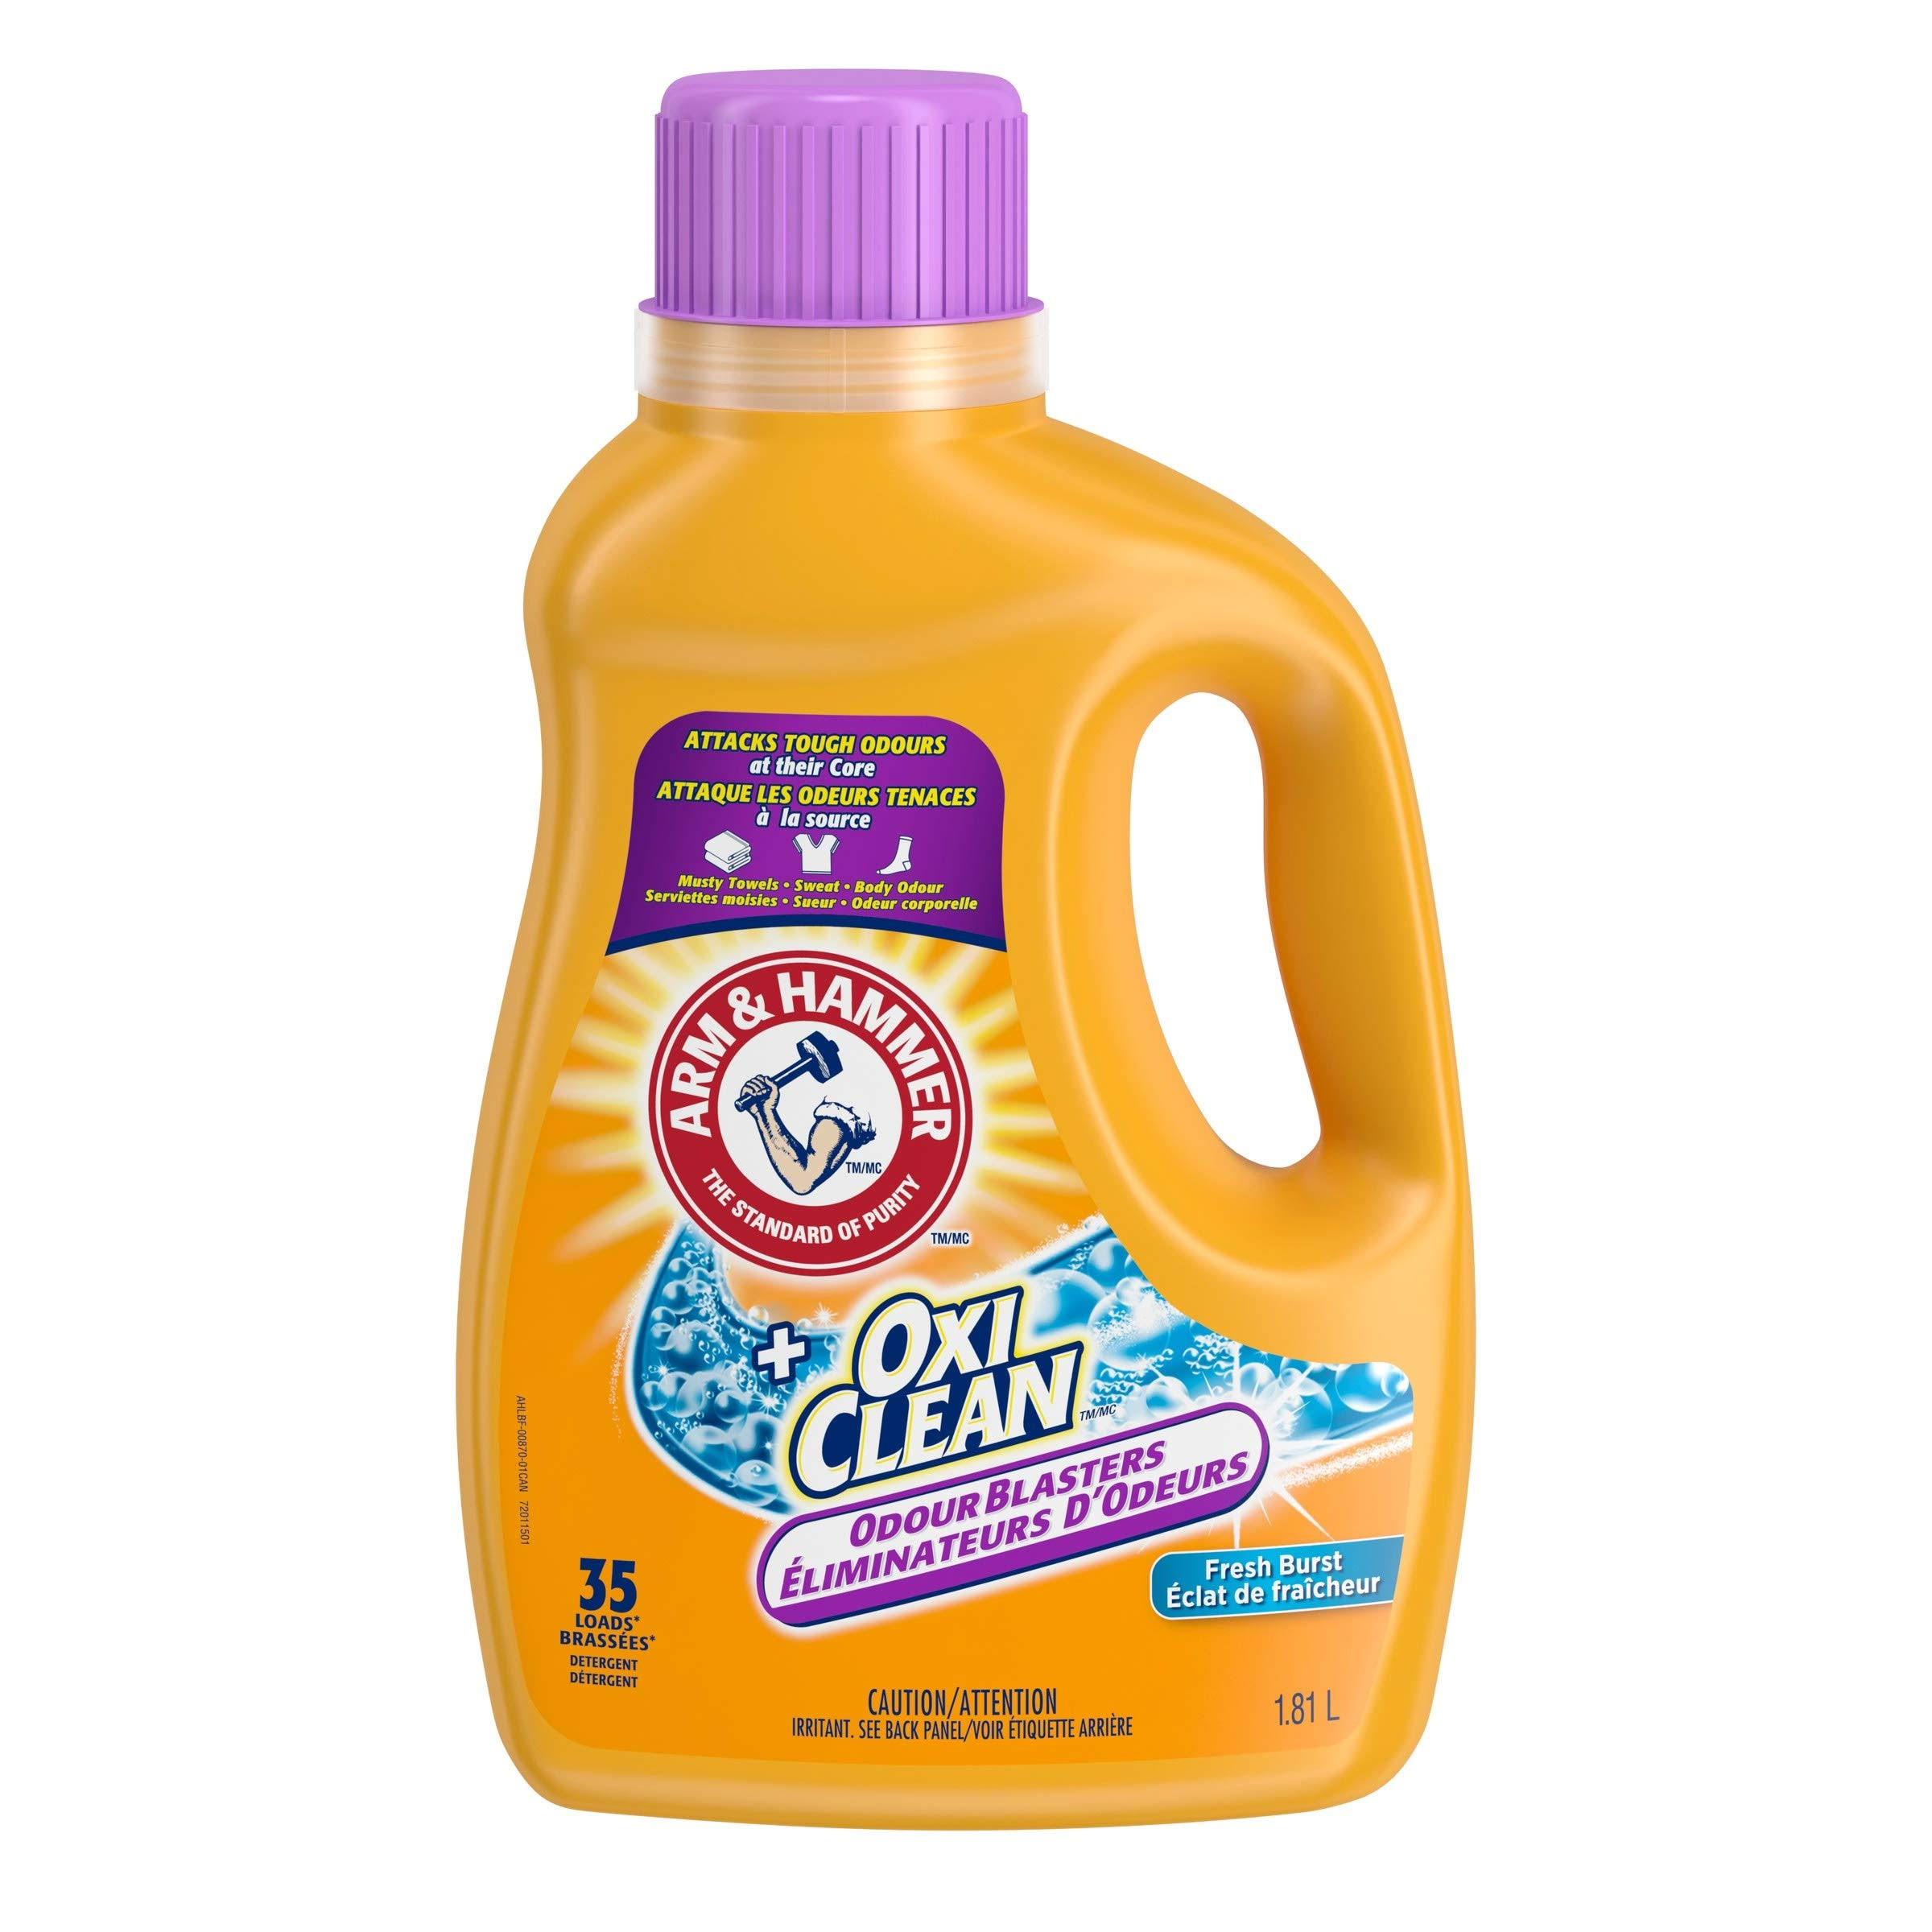 Arm & Hammer Laundry Plus Oxiclean Odor Blasters - 1.81L